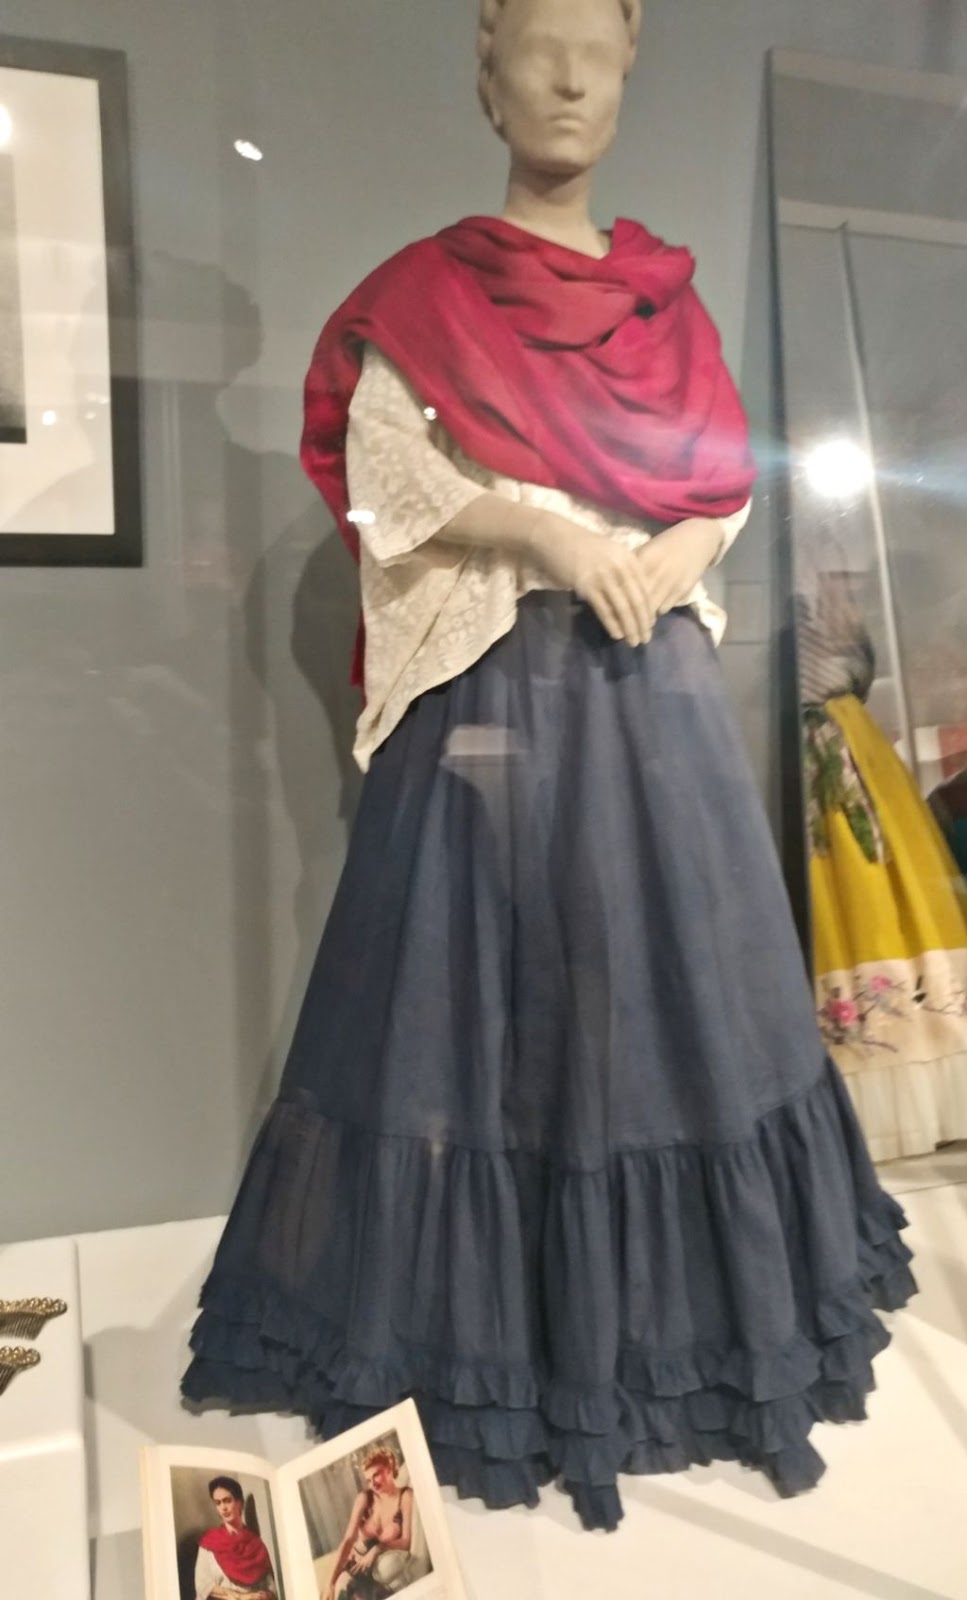 FRIDA KAHLO: APPEARANCES CAN BE DECEIVING // EXHIBITION REVIEW 2019